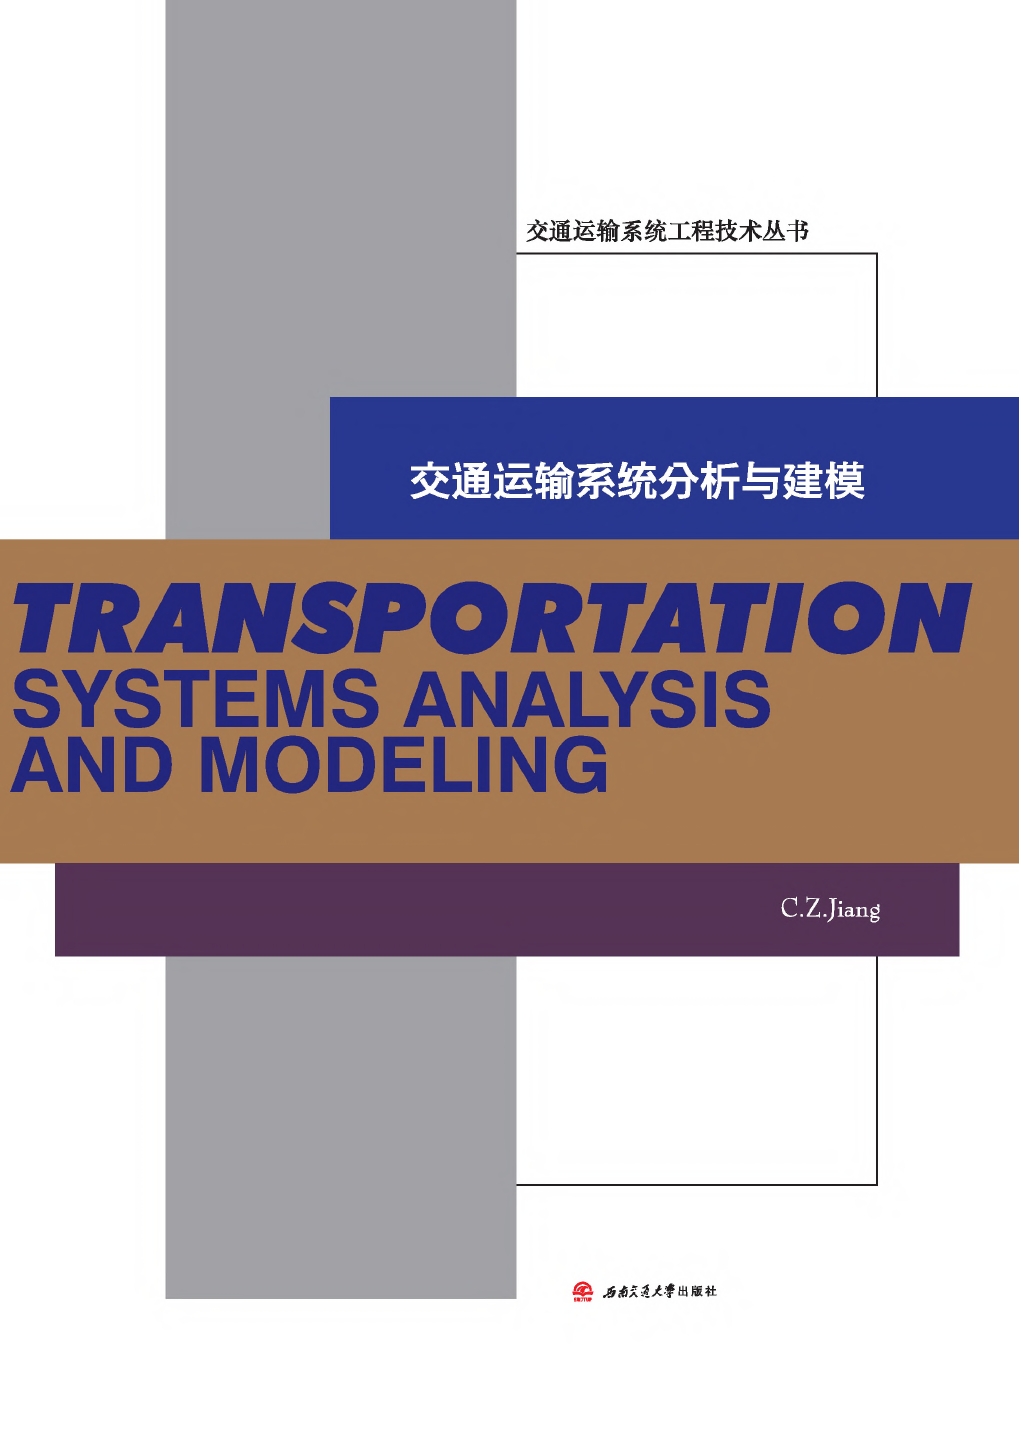 Transportation Systems Analysis and Modeling